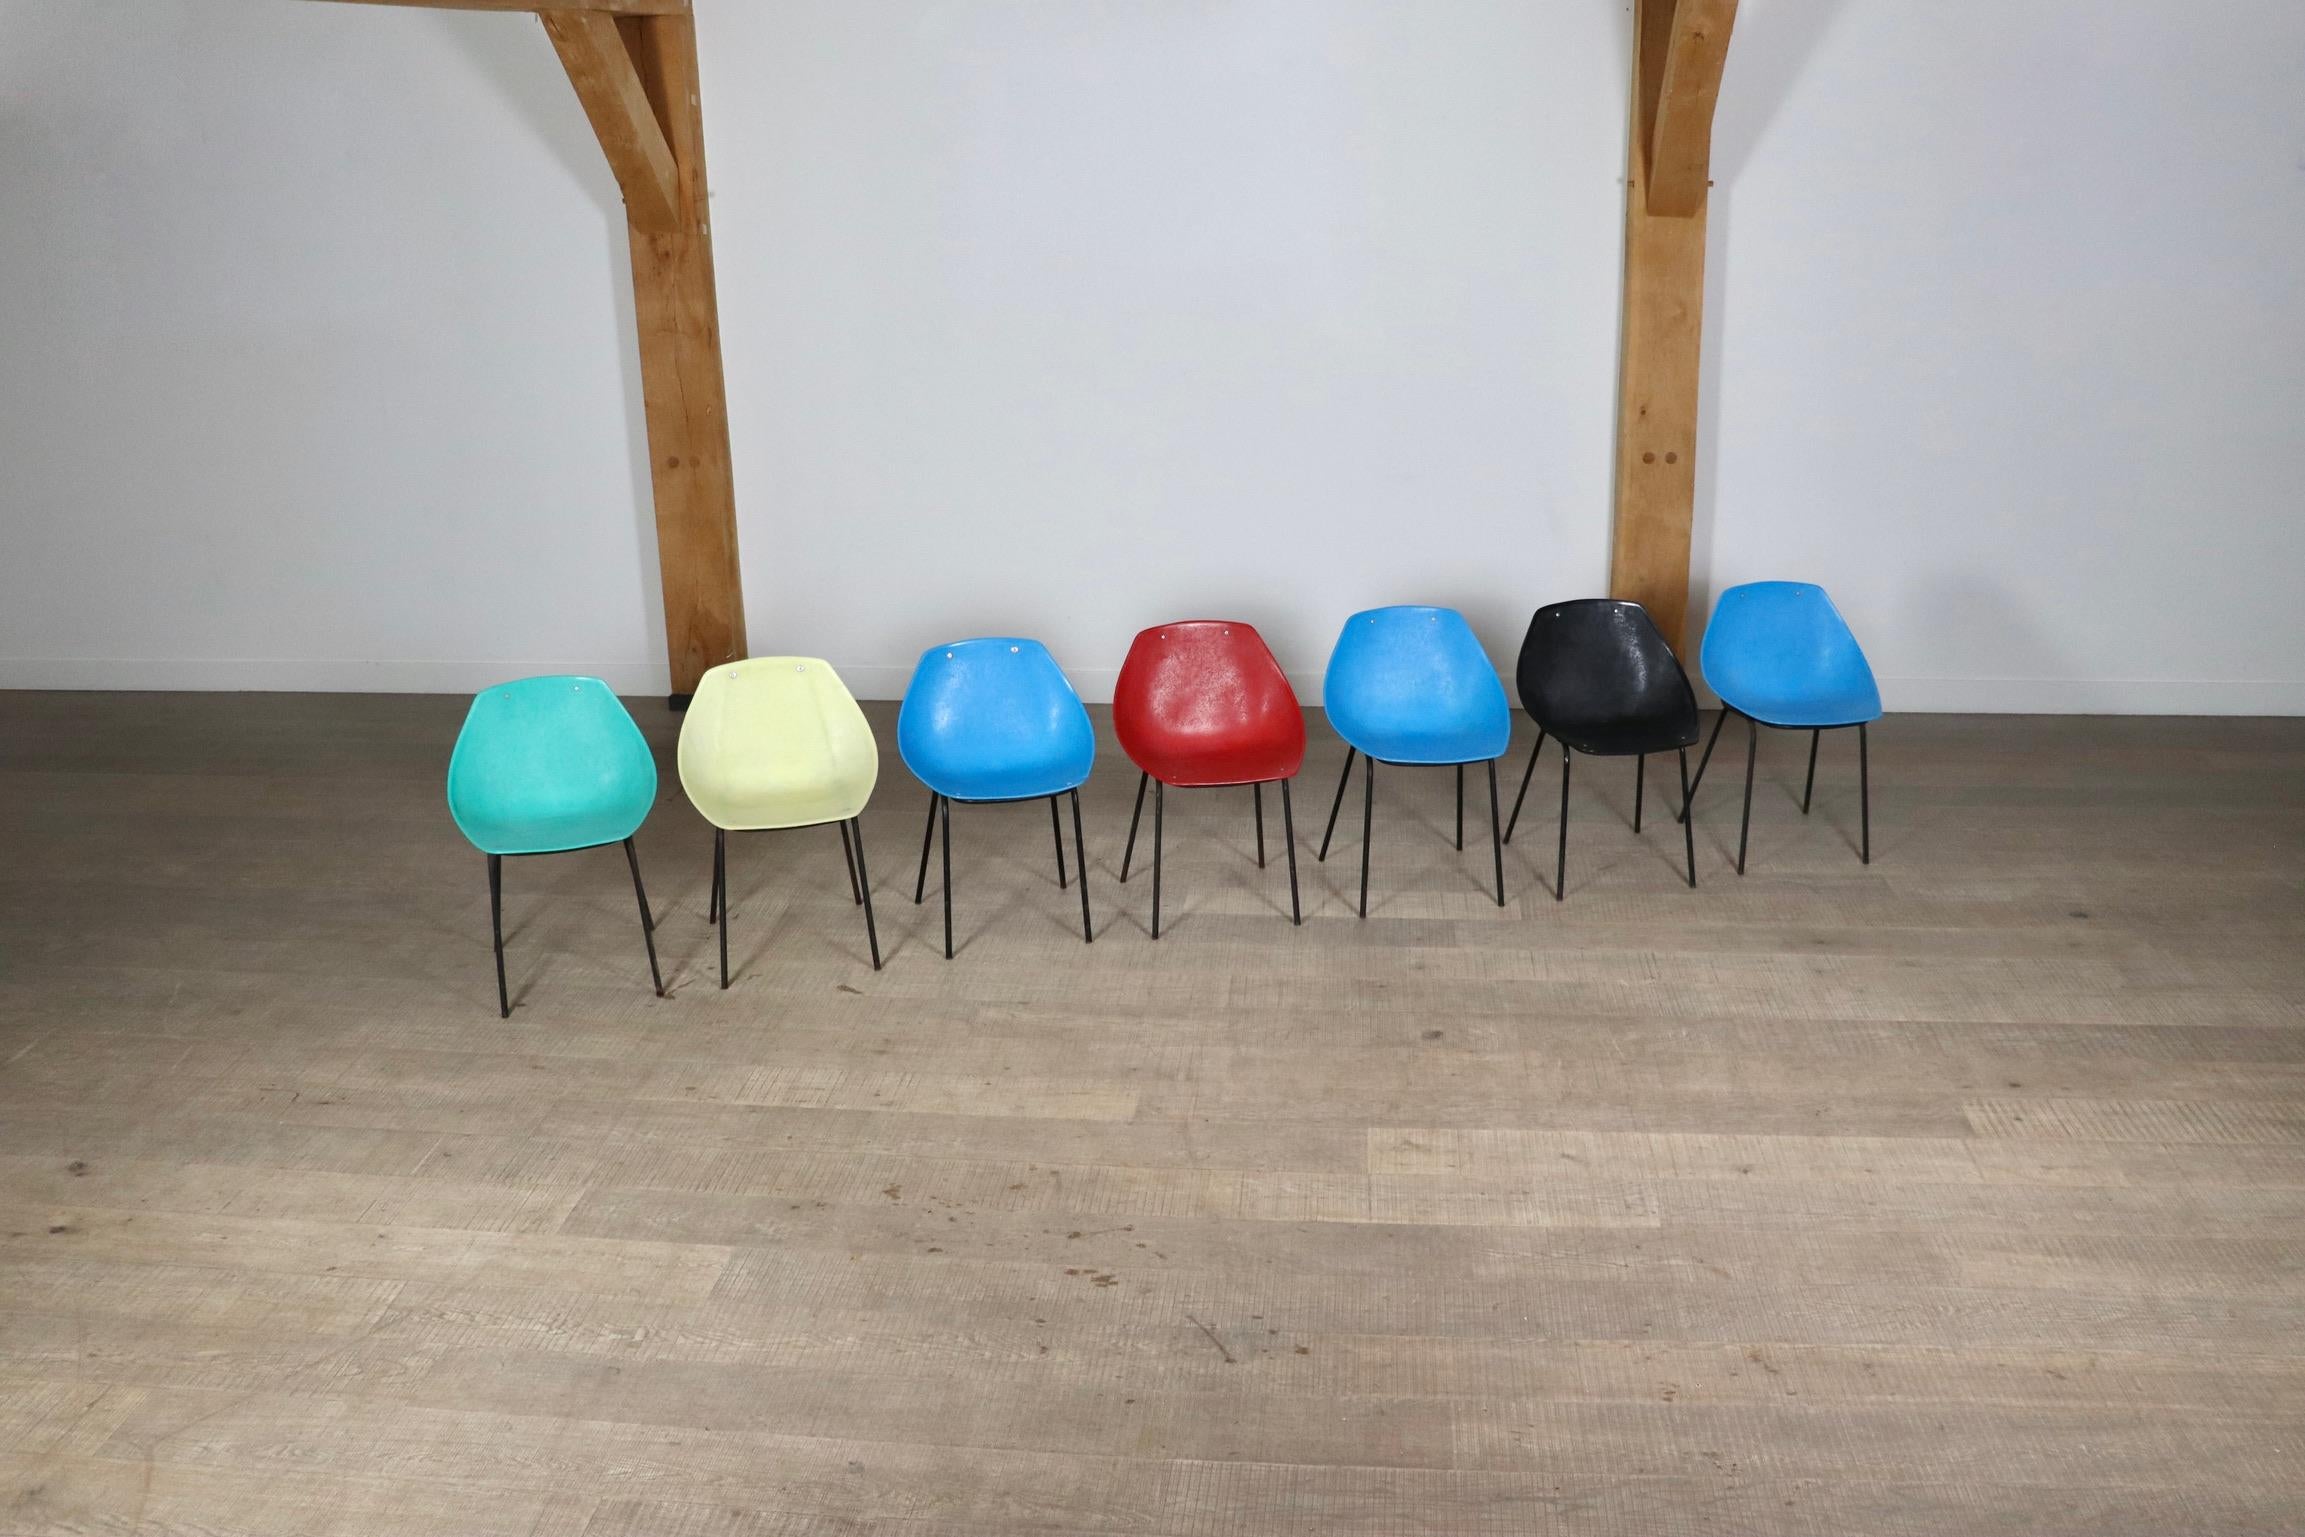 Set of 6 Coquillage chairs by Pierre Guariche for Meurop, Belgium, 1960s. These chairs are also known as “Shell” chairs.
These black, red, yellow, blue, and green shells made of propylene have a base of black enamel steel.
A fun, bright colored set